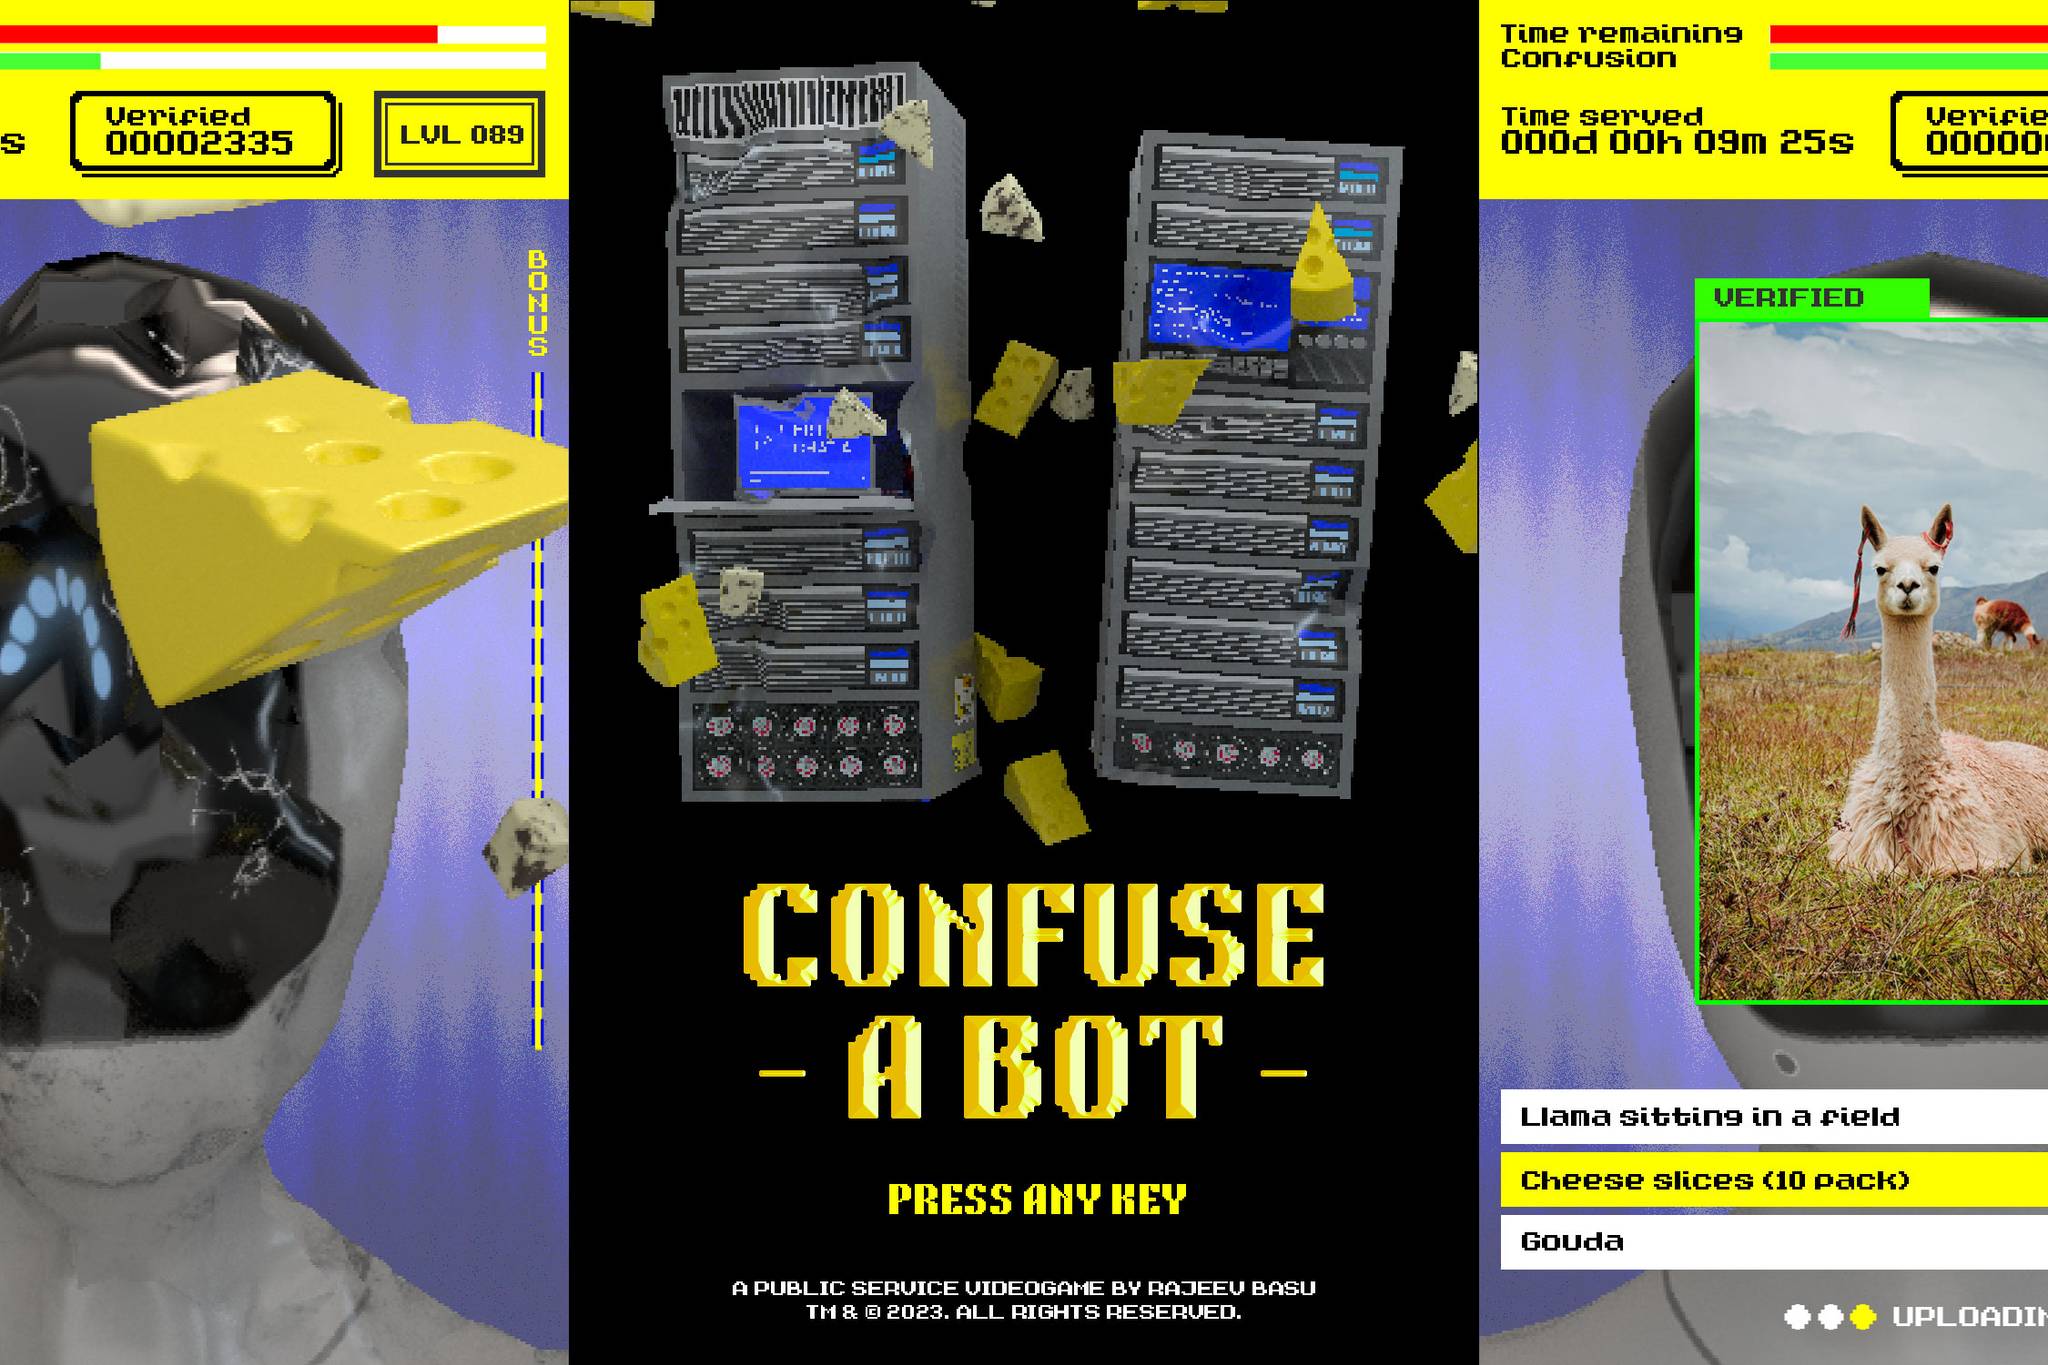 Video game tags web images as cheese to confuse AI